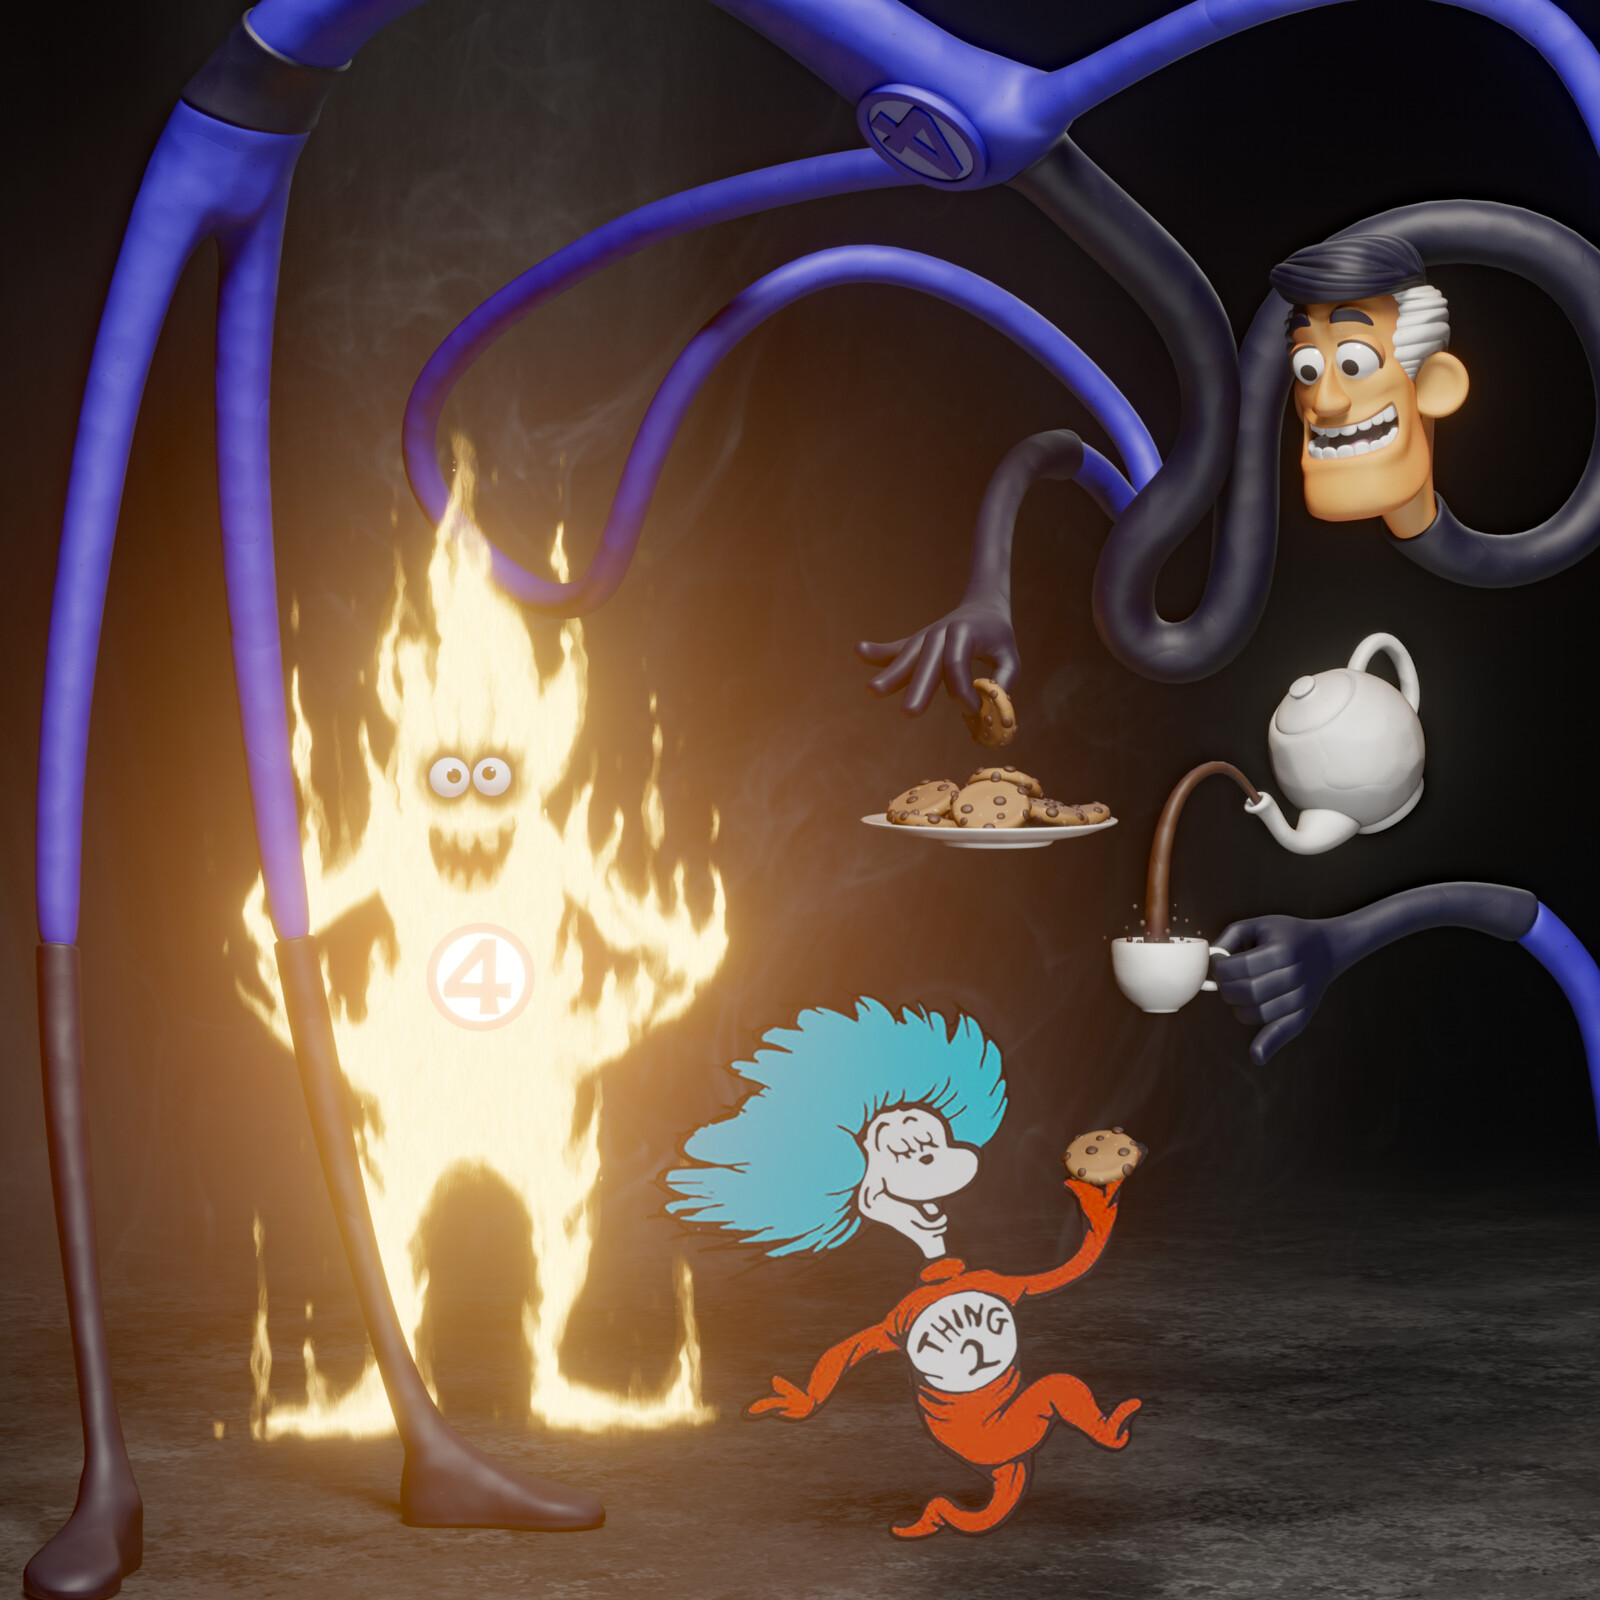 The Fantastic Four (featuring Dr Suess' Thing 2)